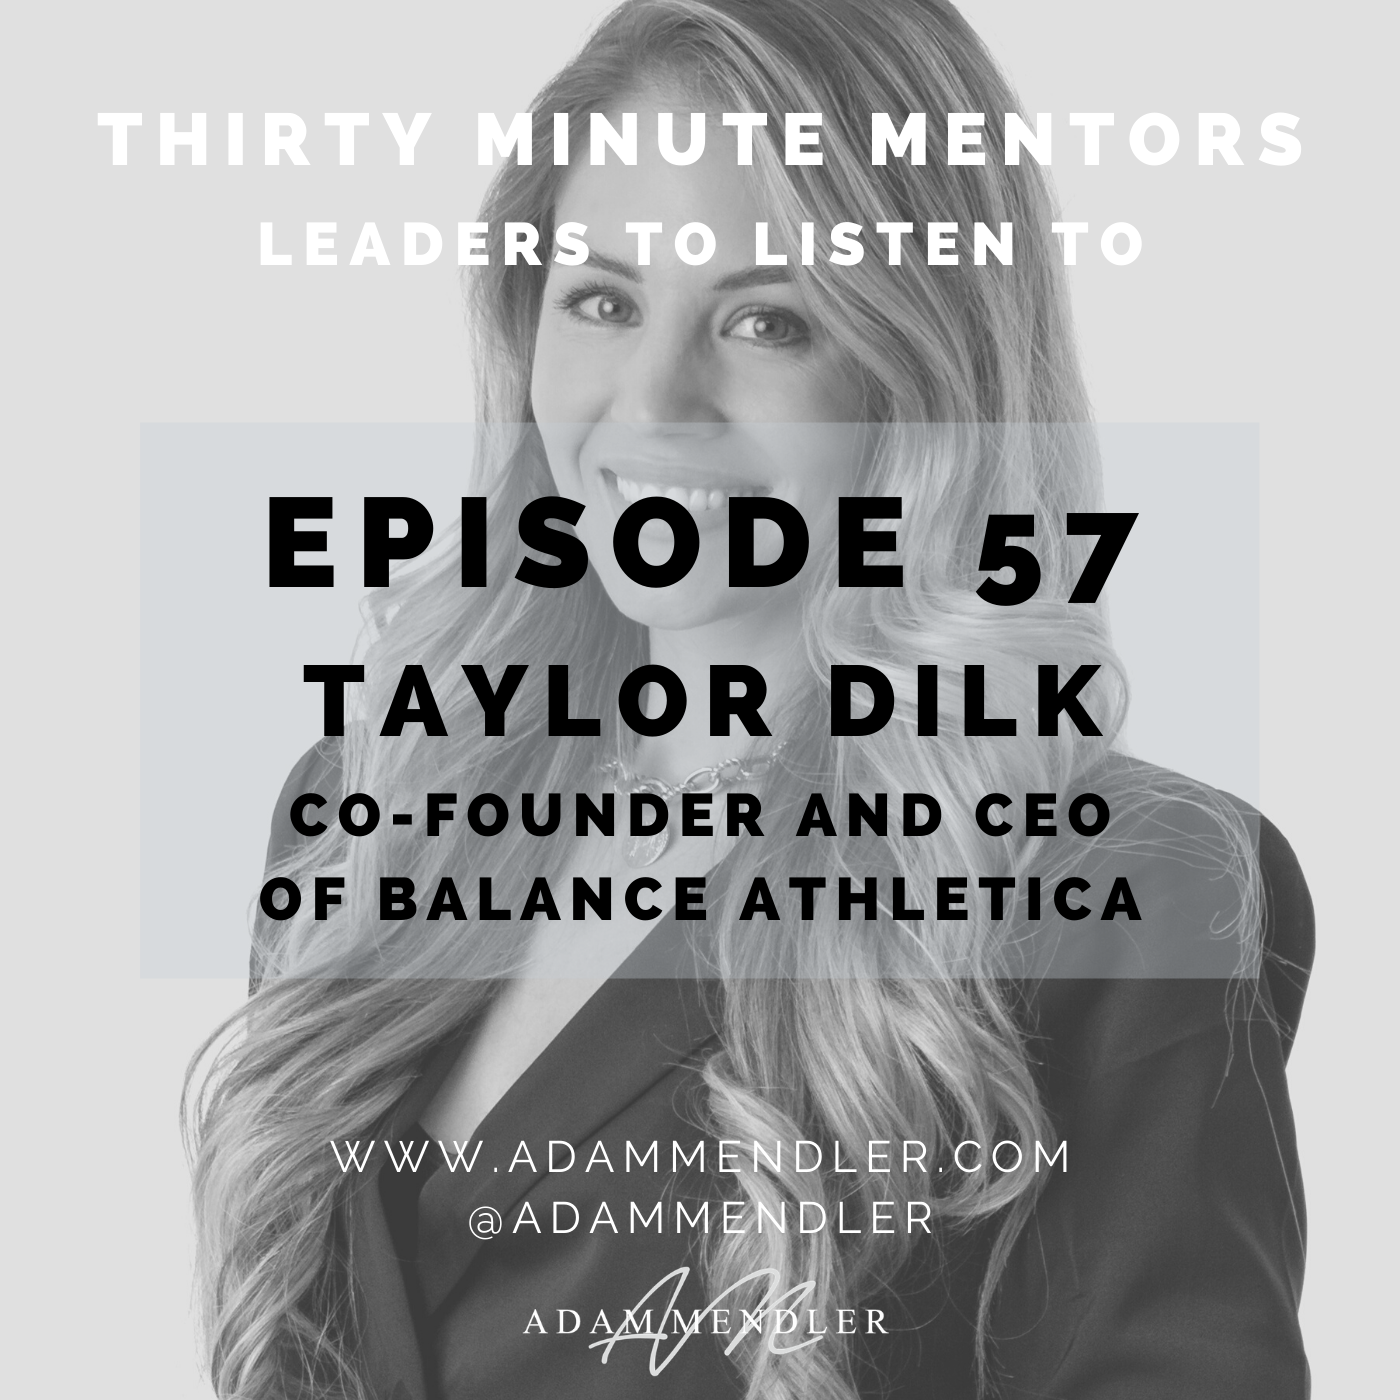 Episode 57: Balance Athletica Co-Founder and CEO Taylor Dilk